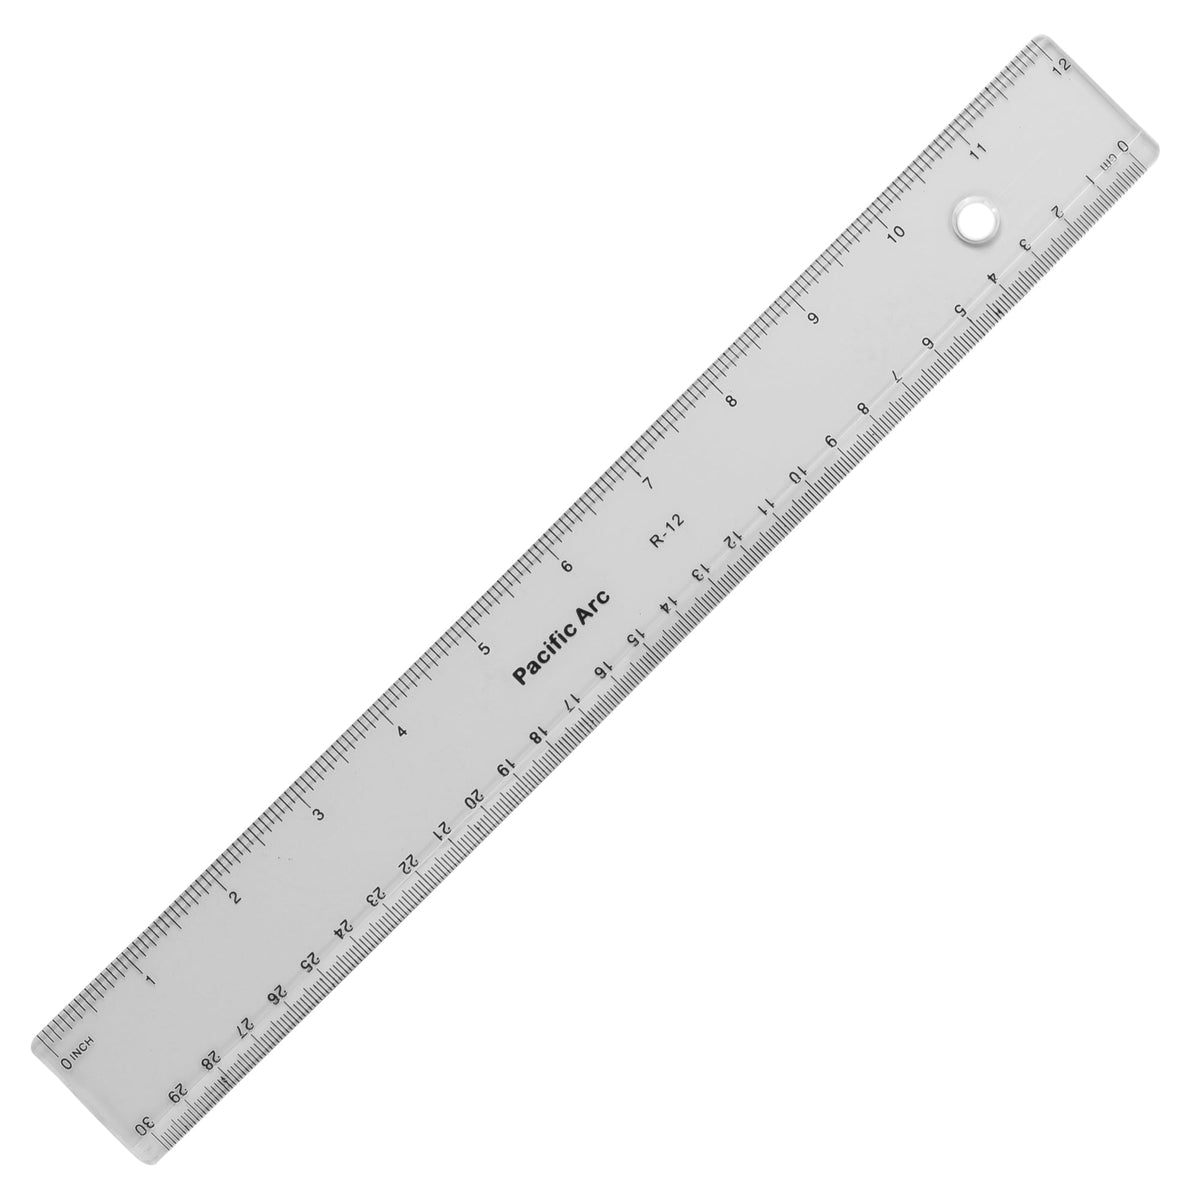 Pacific Arc - 12 Inch Ruler Clear Plastic, Graduations in Inches and Centimeters